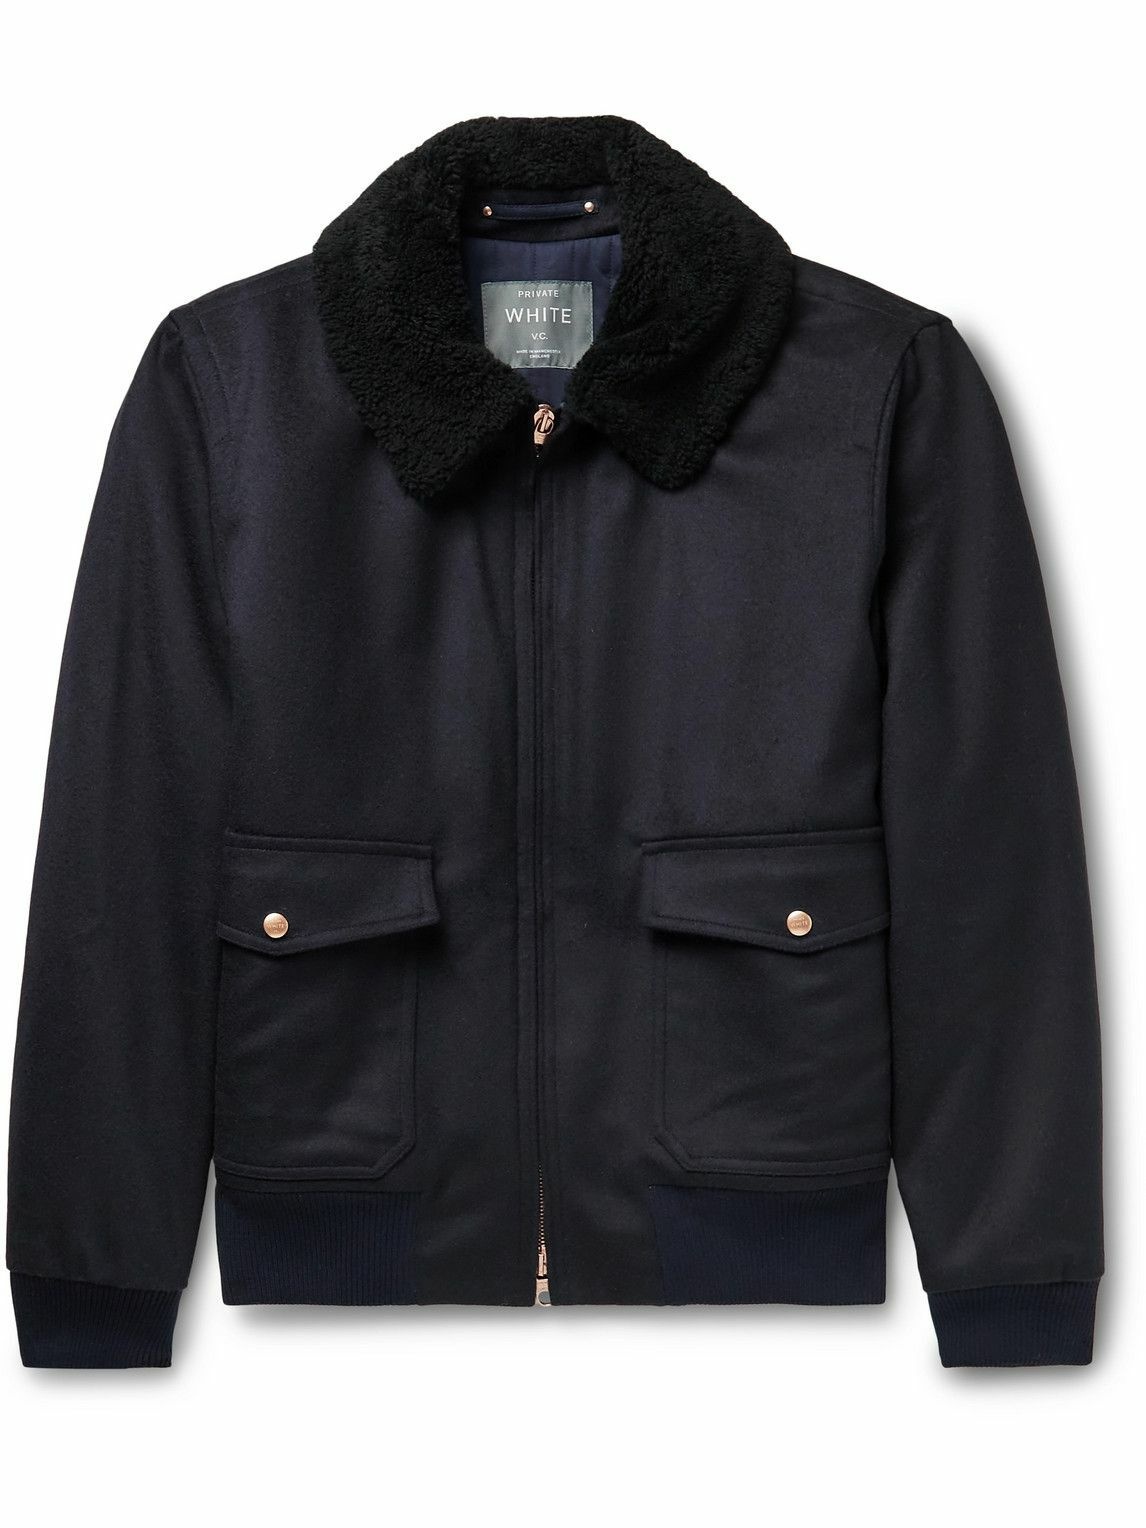 Private White V.C. - The Pilot's Shearling-Trimmed Wool Bomber Jacket ...